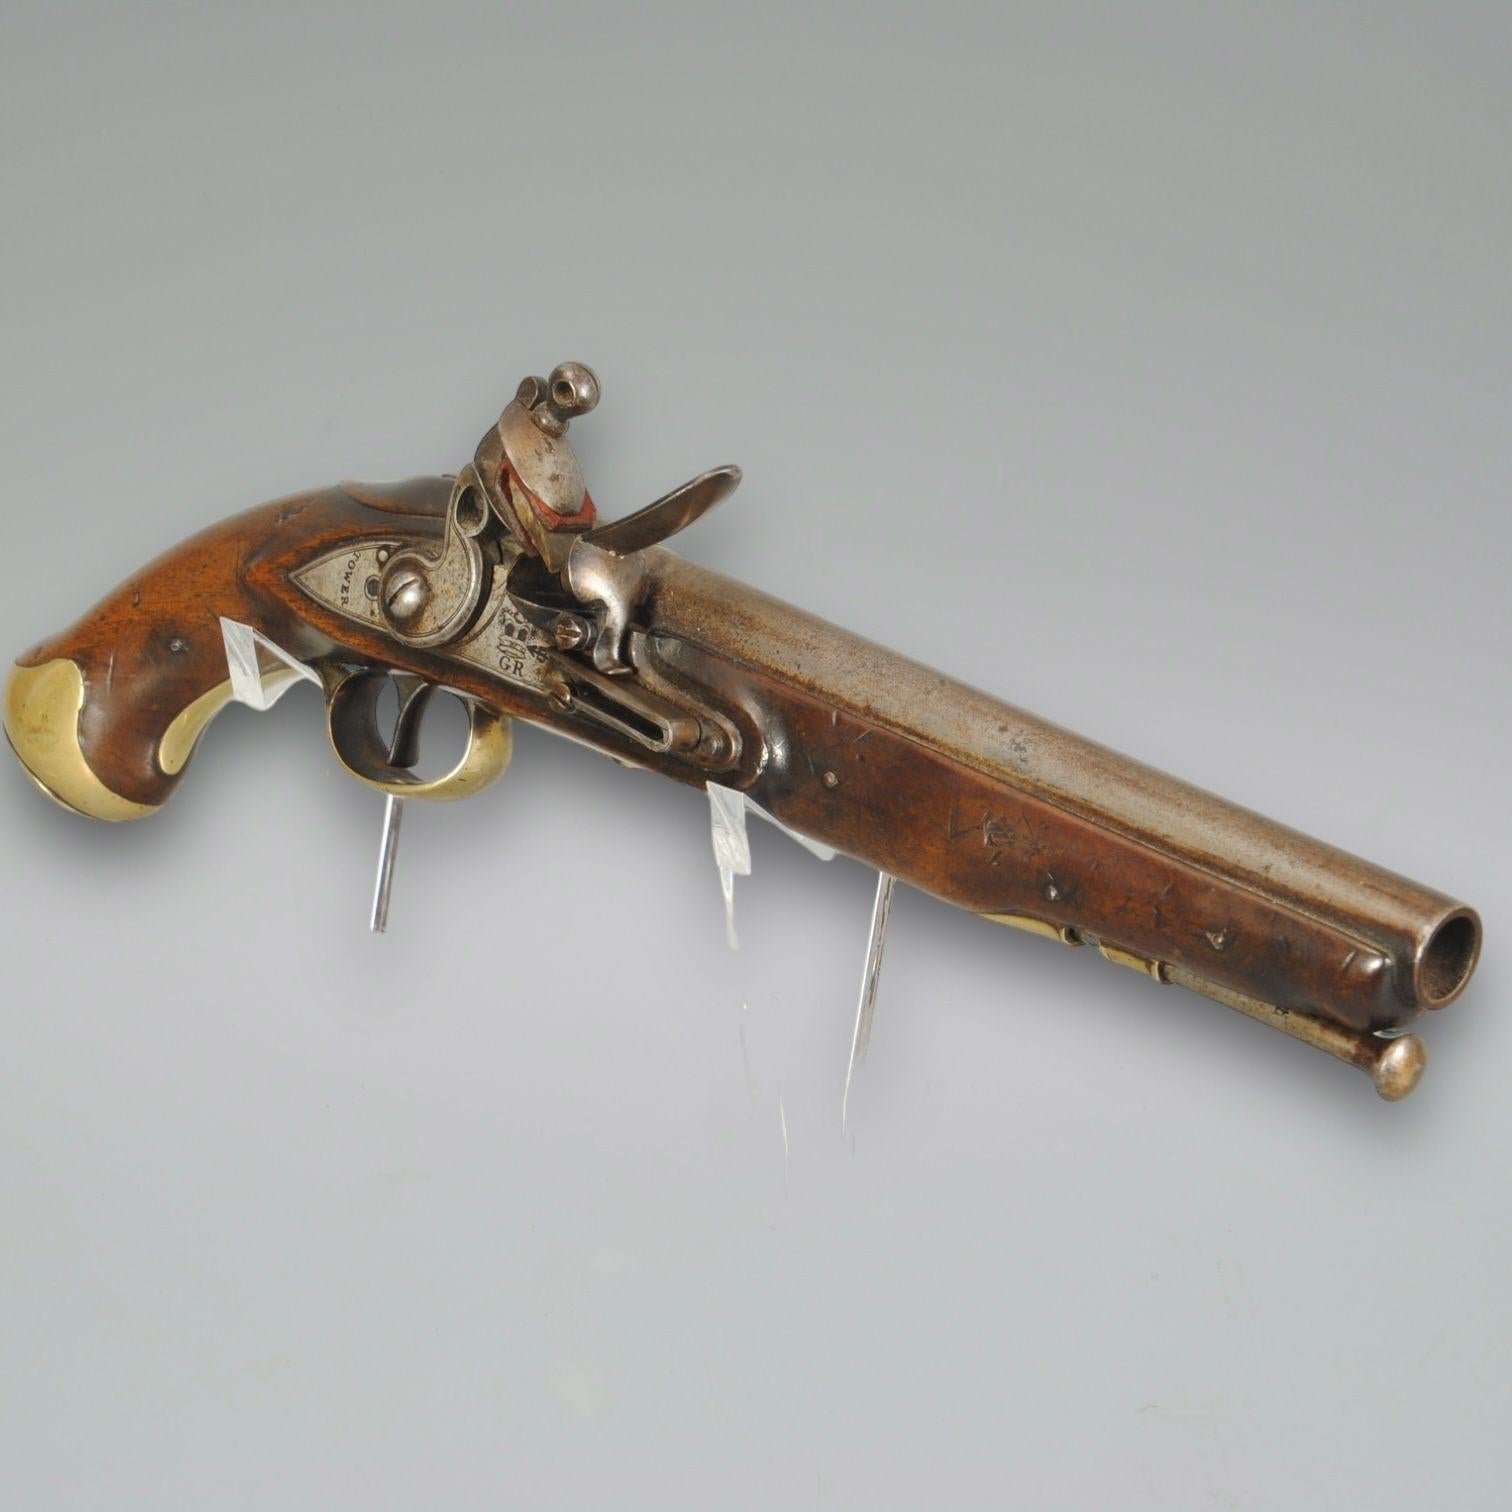 A very good example of a flintlock light Dragoon pattern pistol with walnut stock and good tower marks on the lock.
In wonderful untouched condition
Circa 1800
Barrel length 9